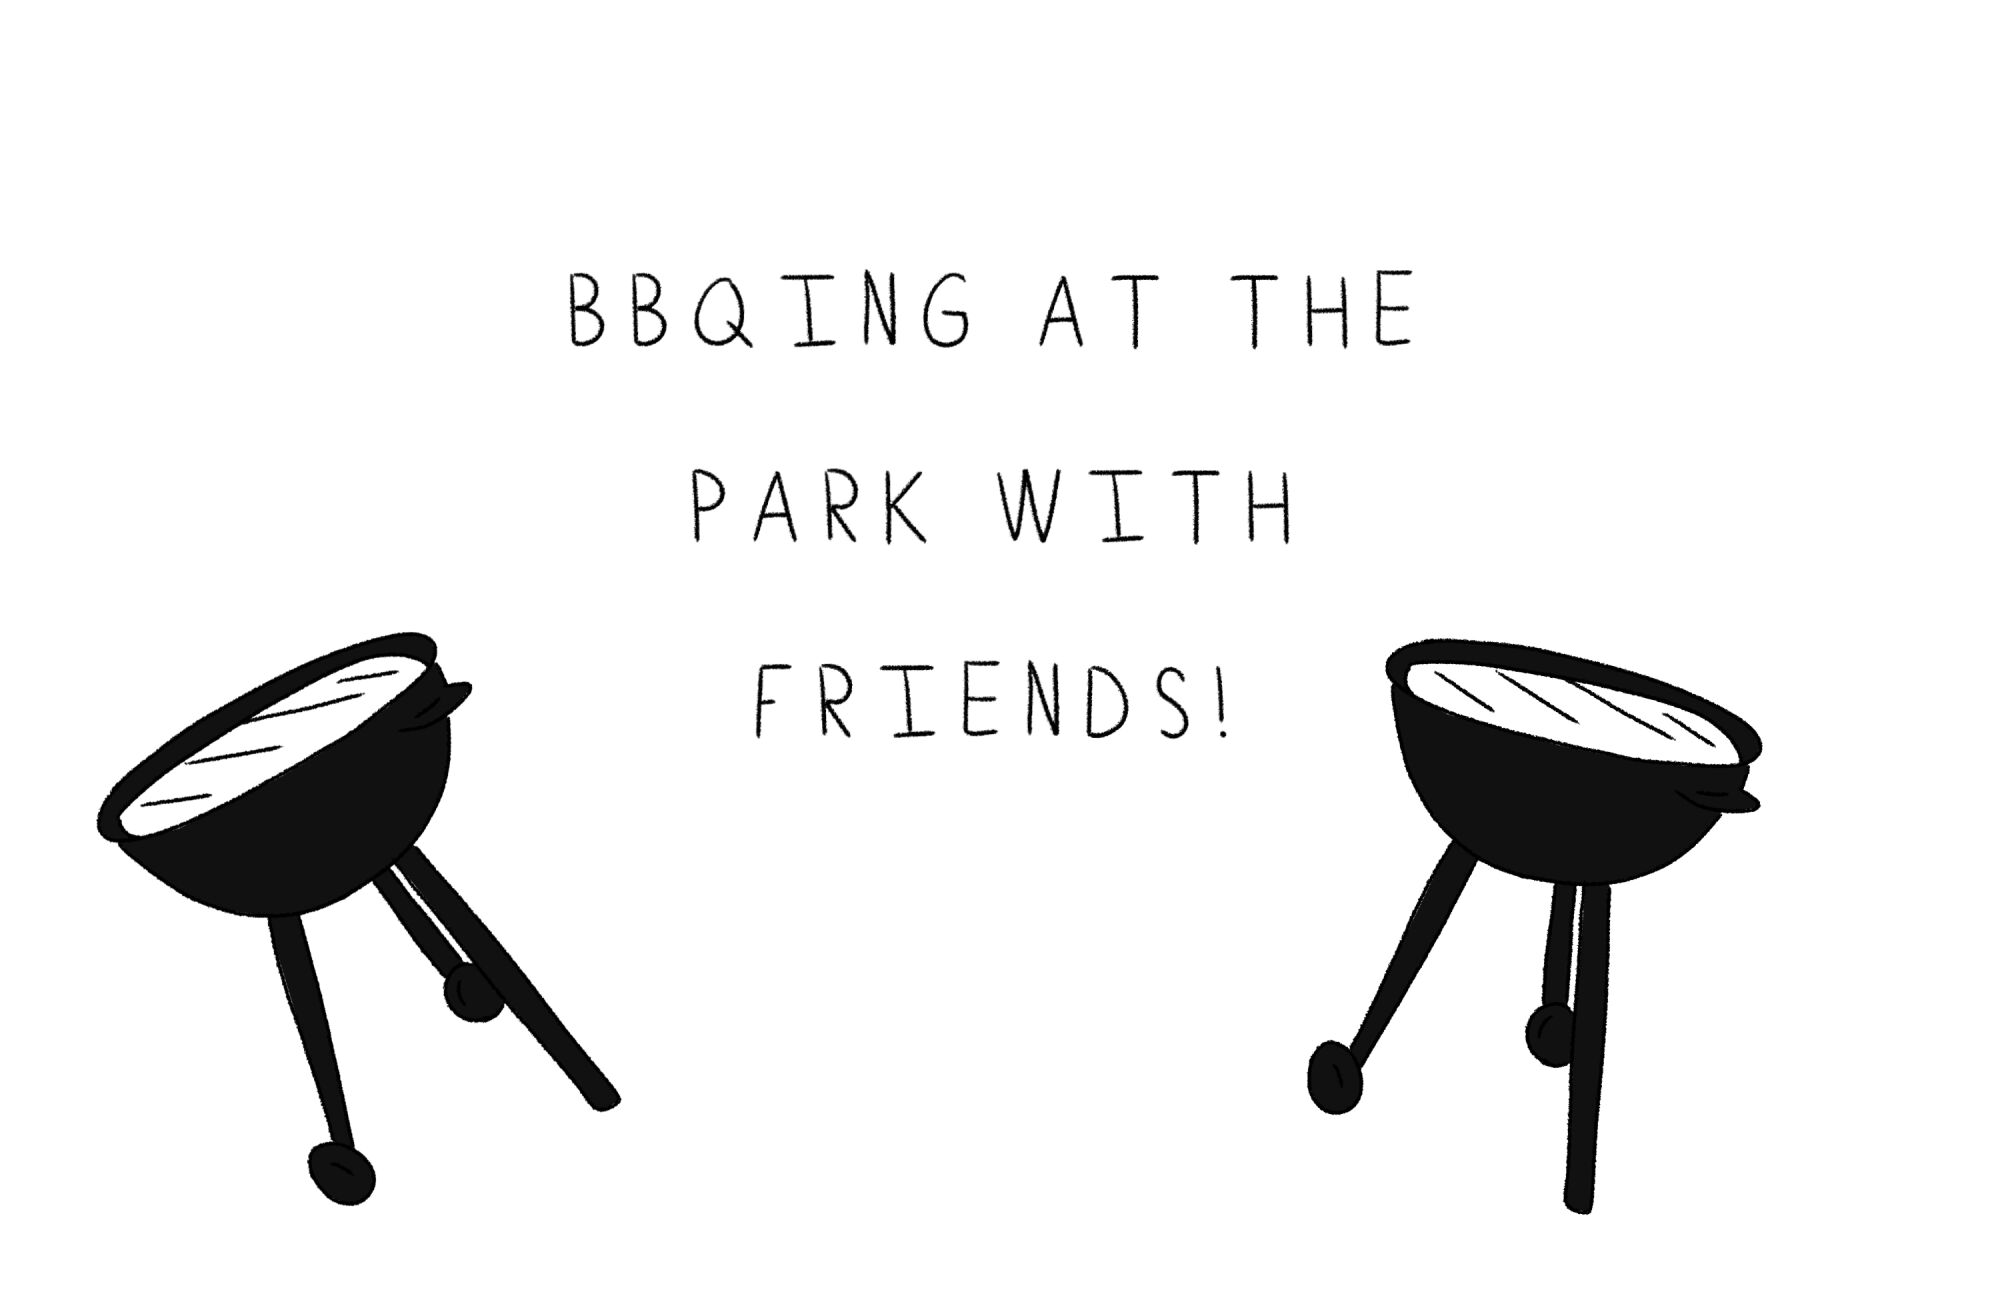 An illustration of barbecue grills.